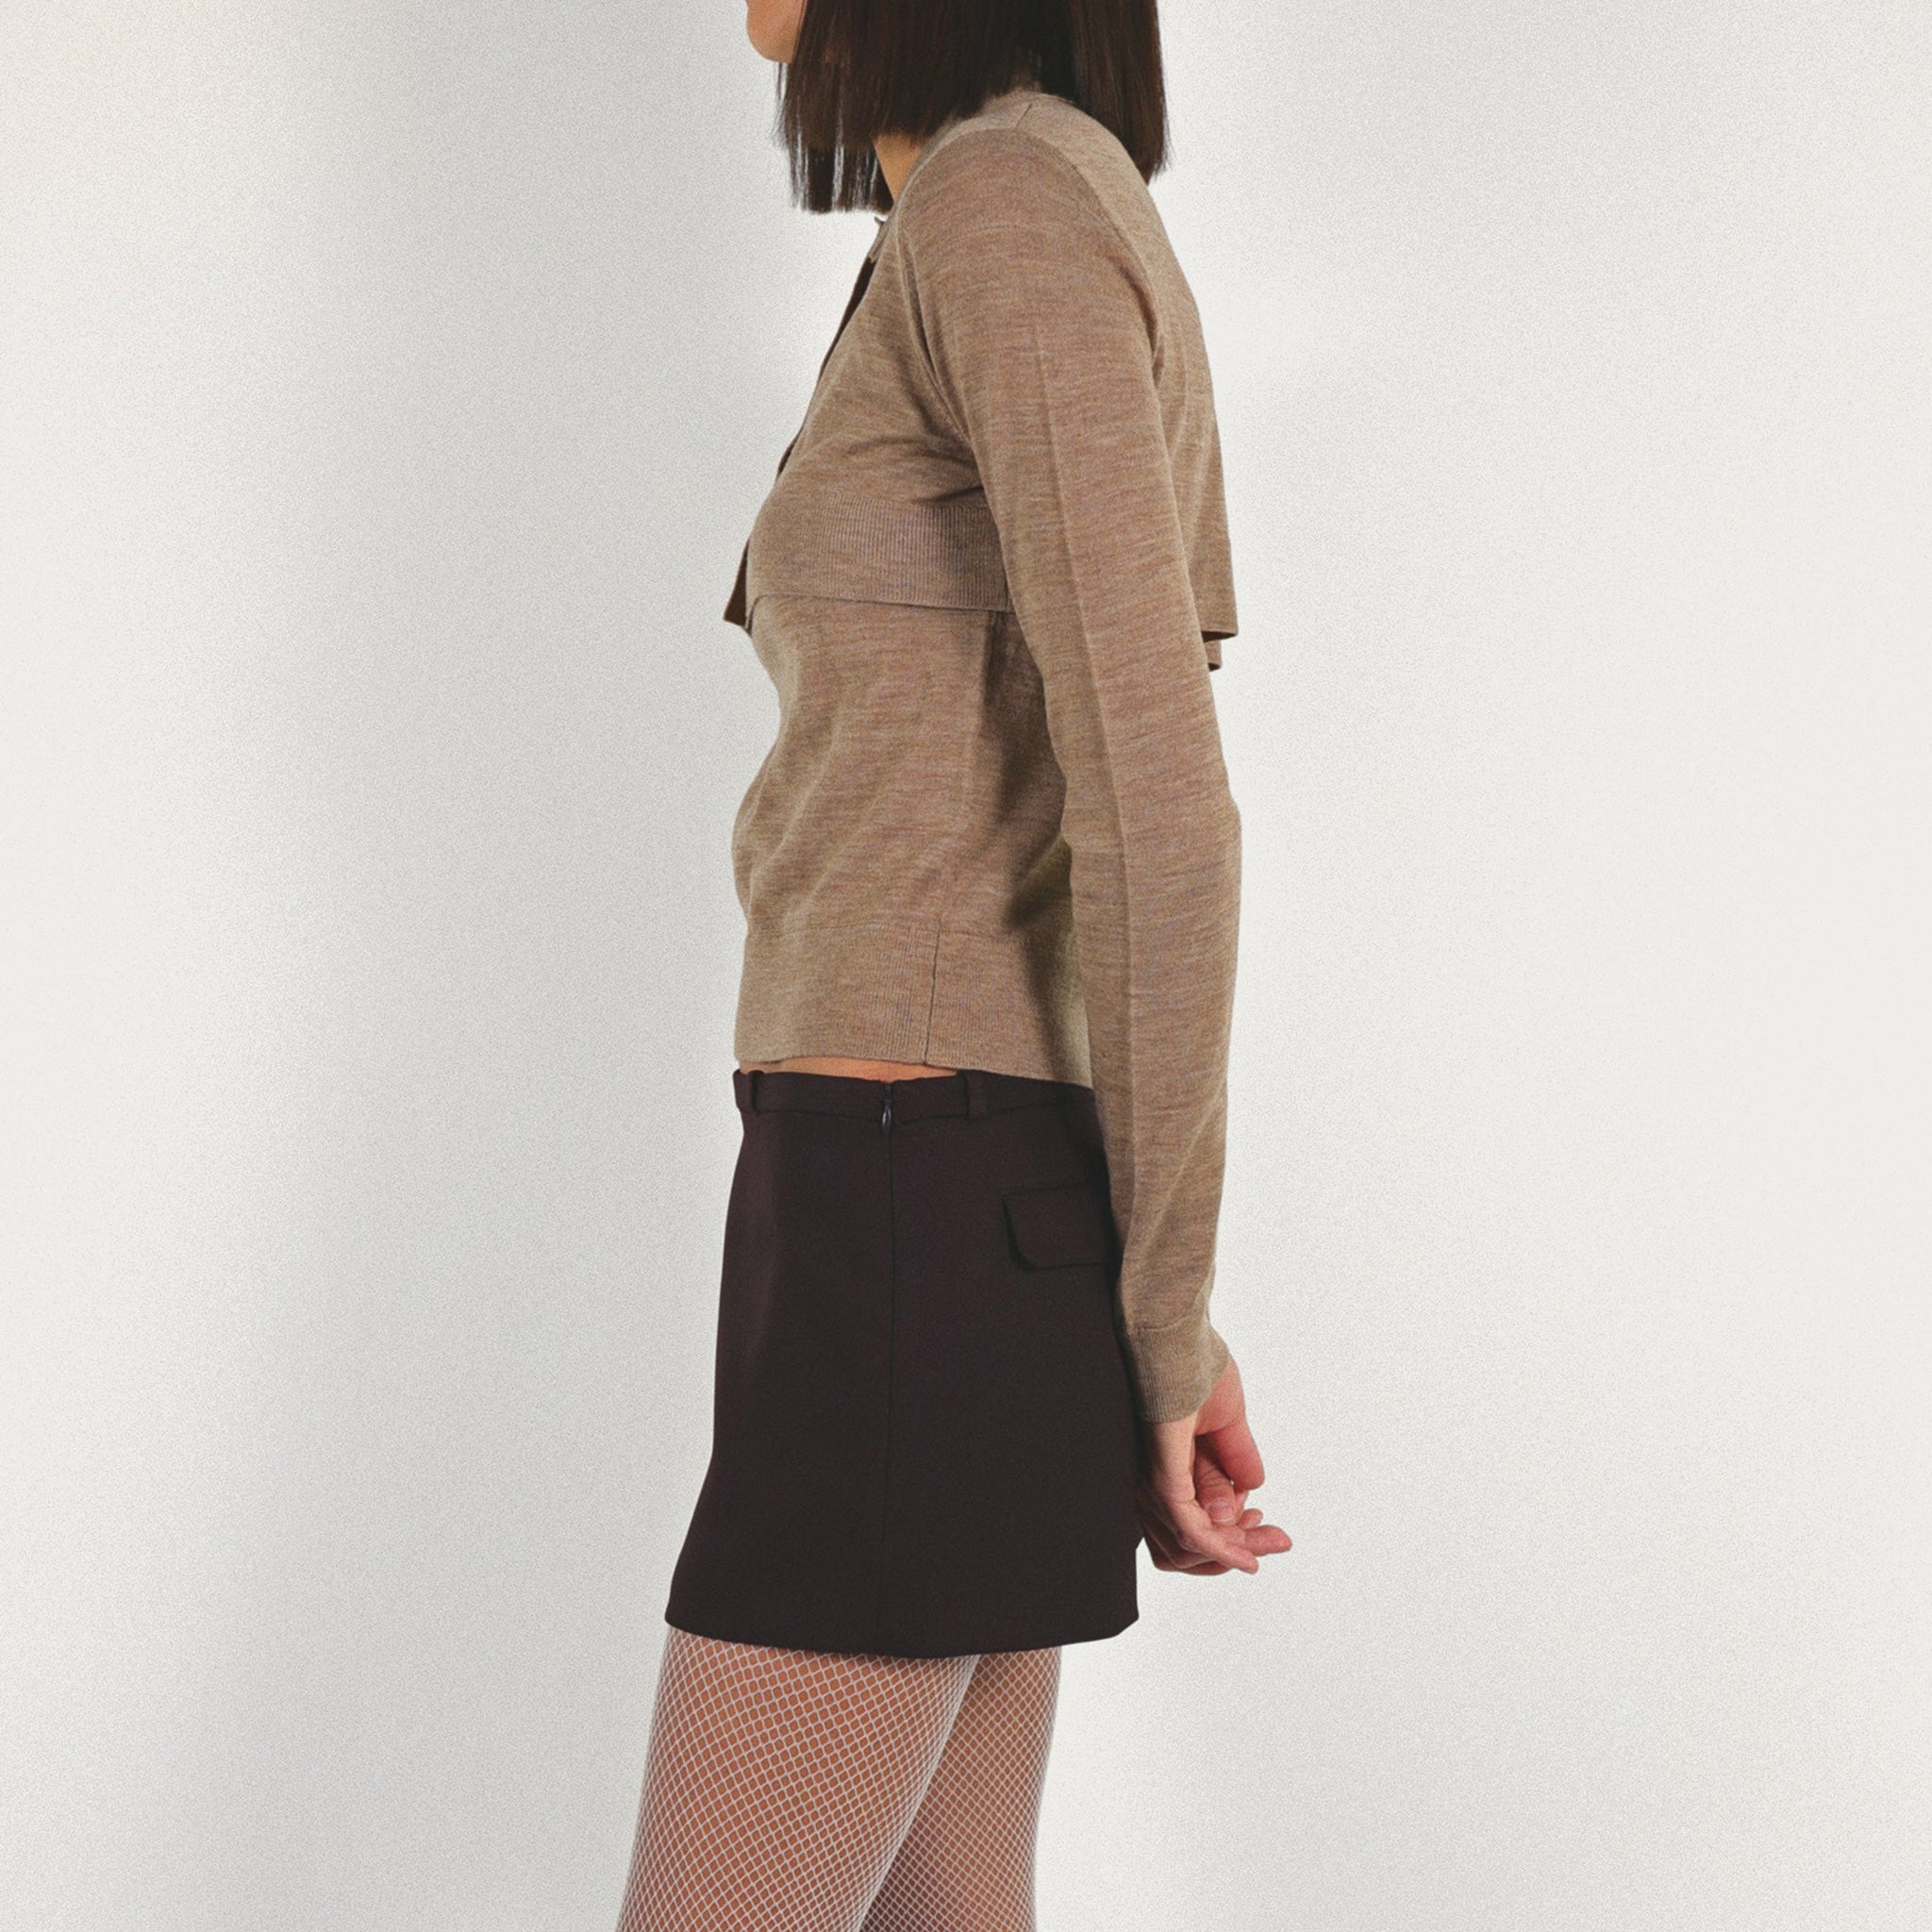 Side Half body photo of model wearing the Seek Sweater paired with a dark brown mini skirt. 